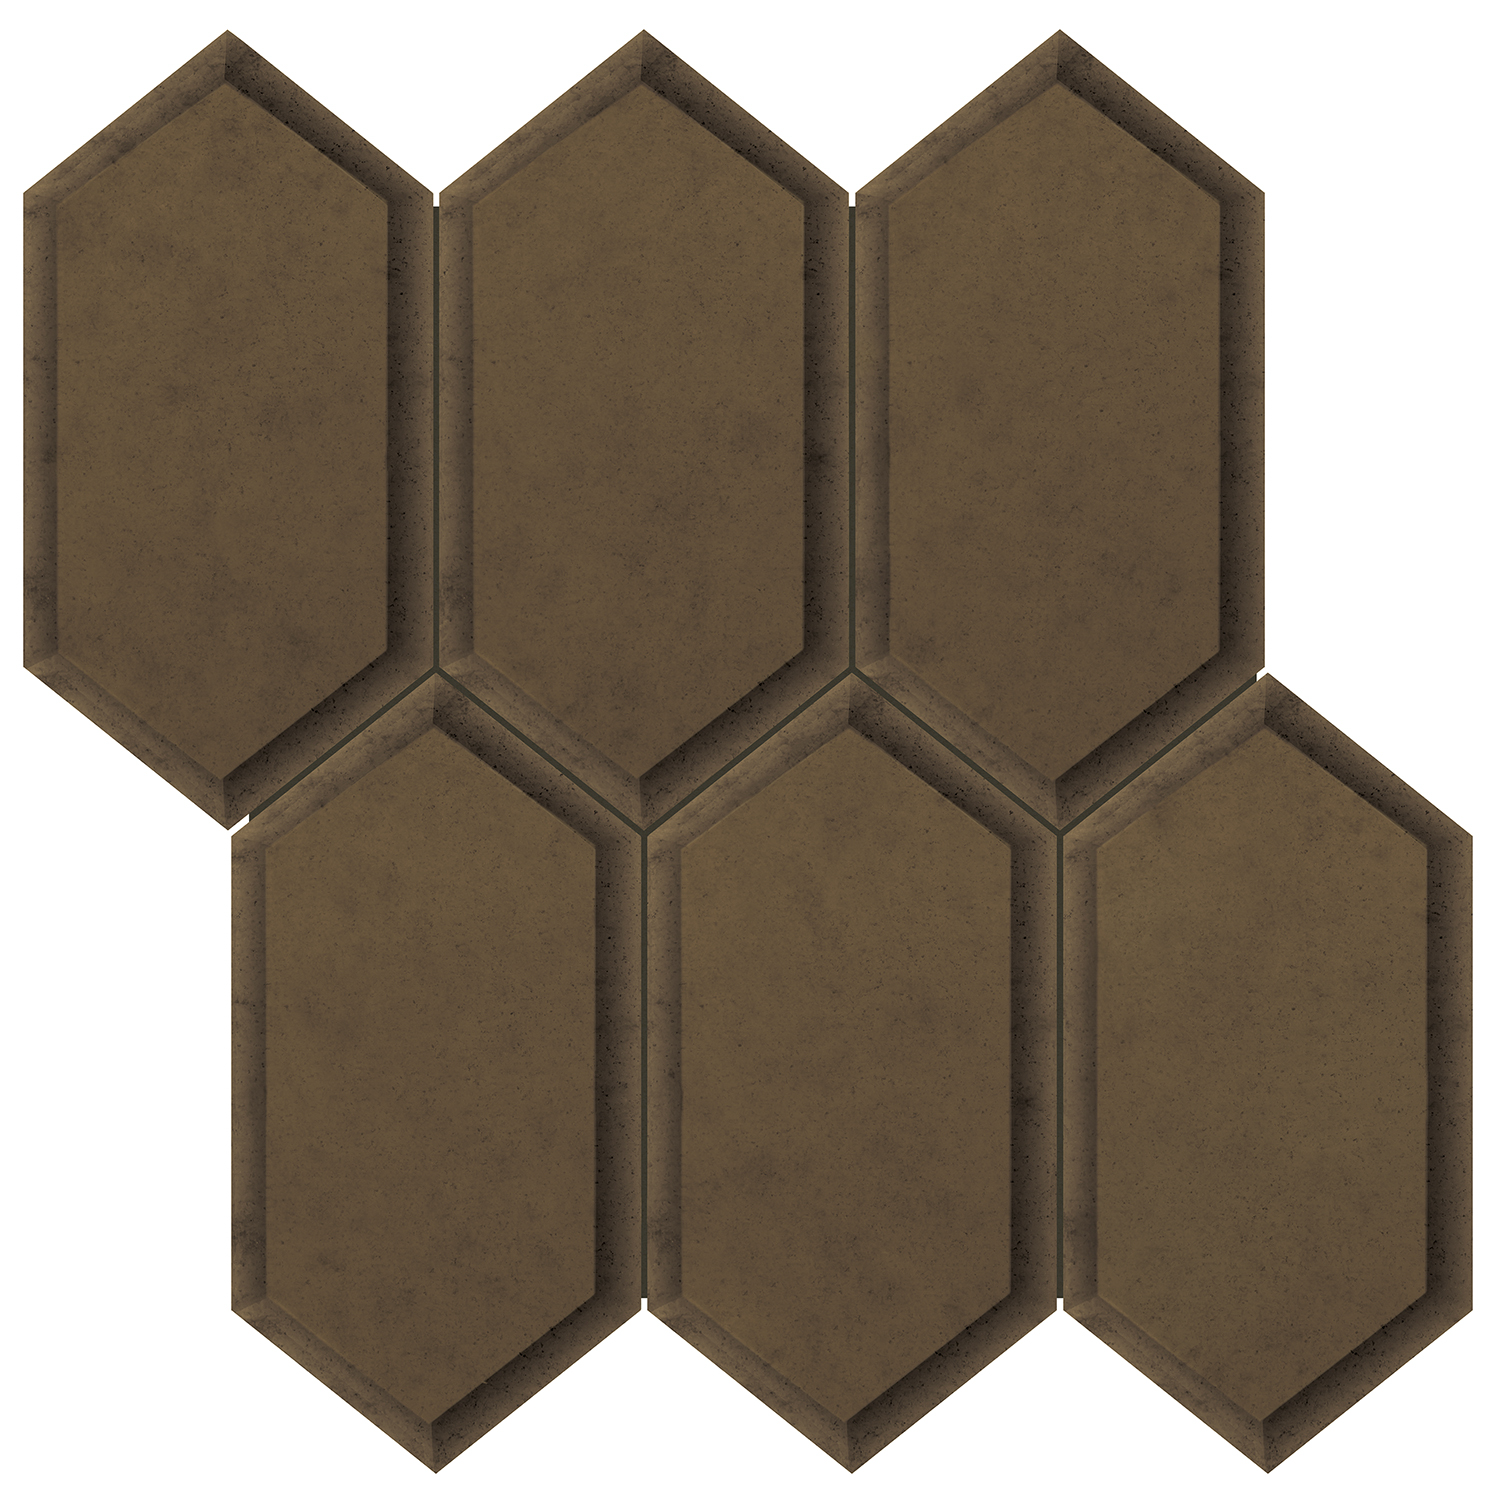 antique bronze hexagon pattern fused glass mosaic from obsidian anatolia collection distributed by surface group international glossy finish beveled edge mesh shape